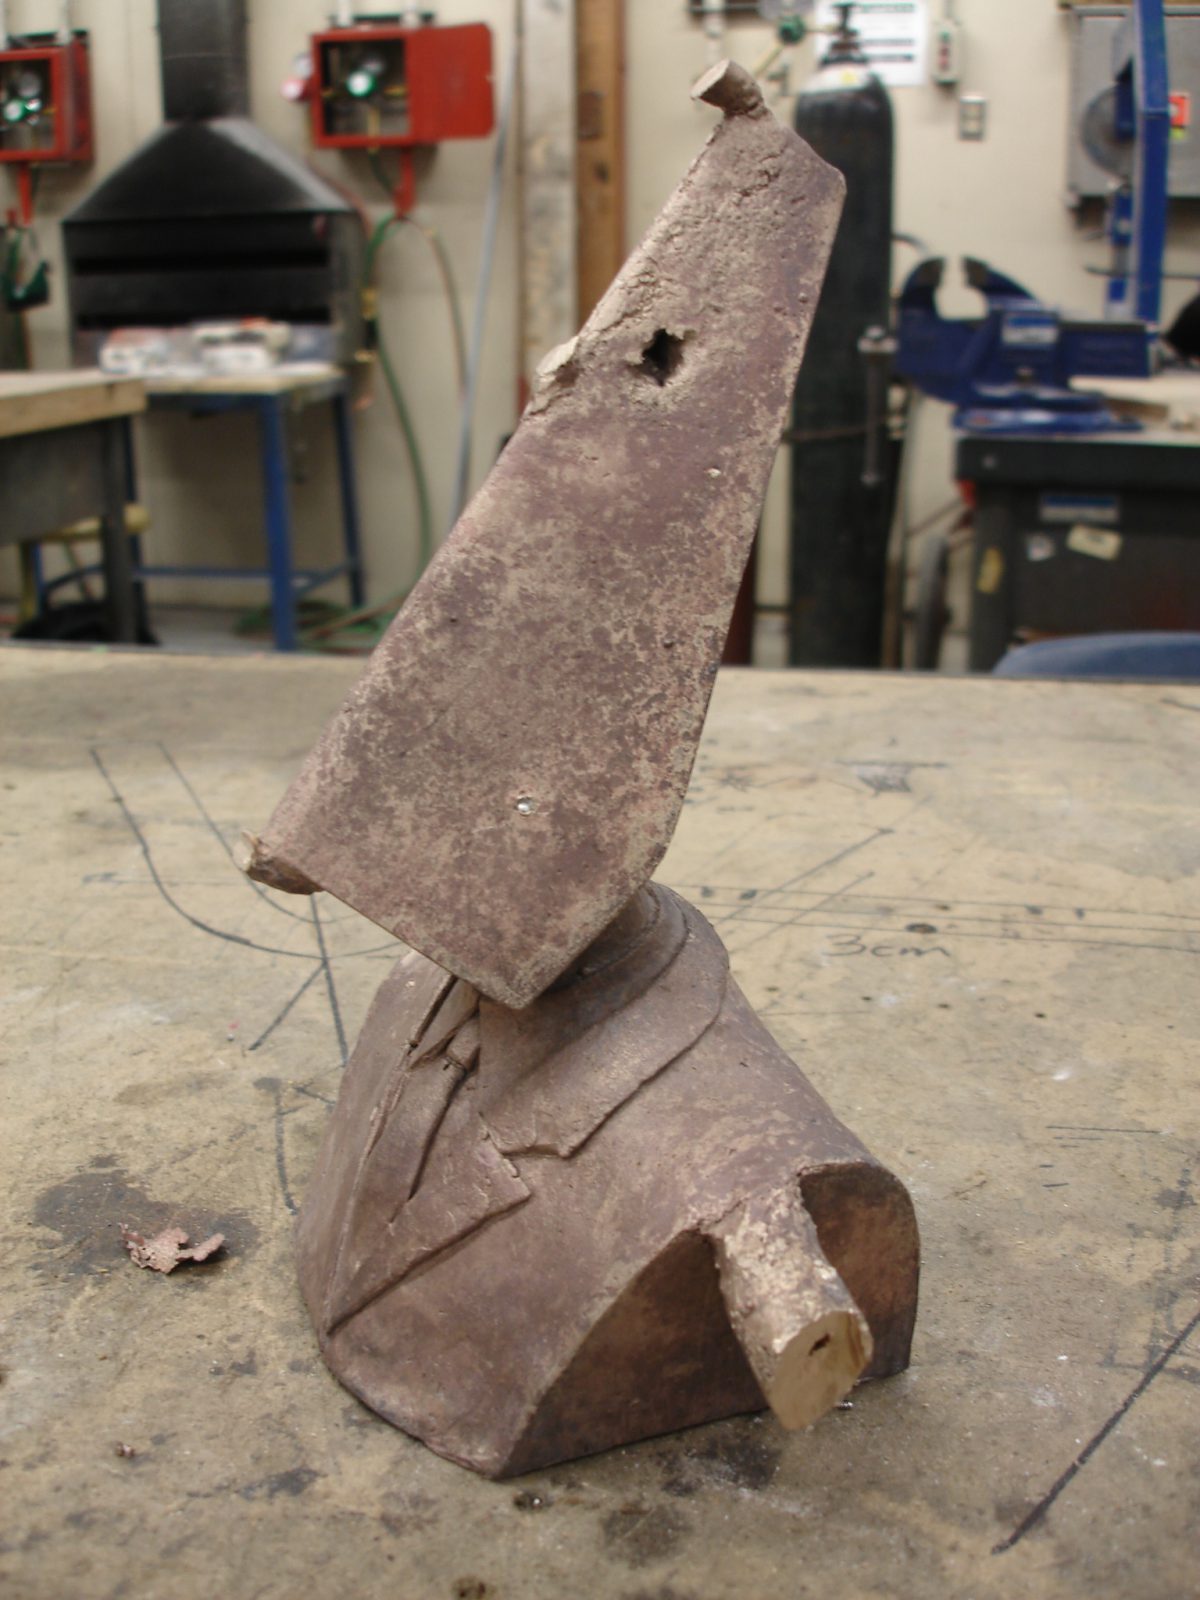 Conqueror wip - There are a few minor problems that can be fixed, process, bronze, sculpture, ch3